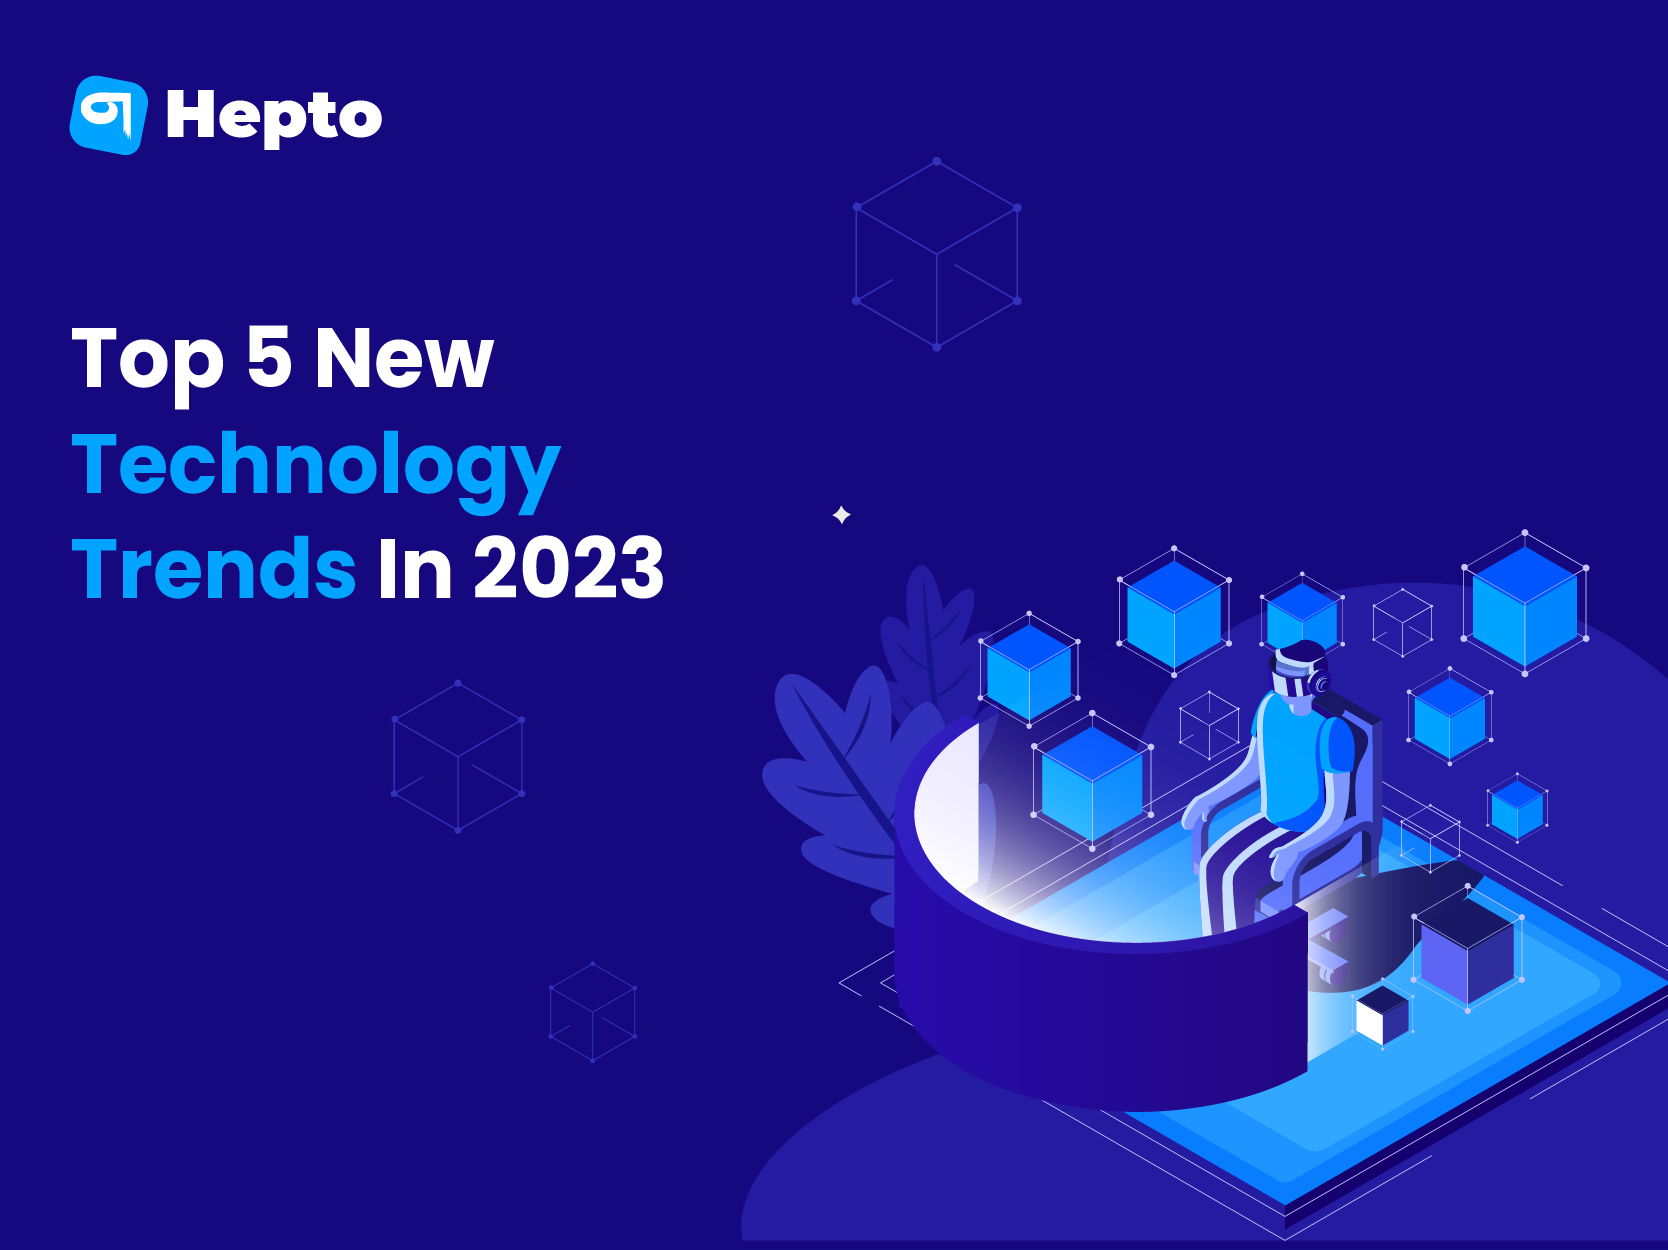 New technology trends in 2023